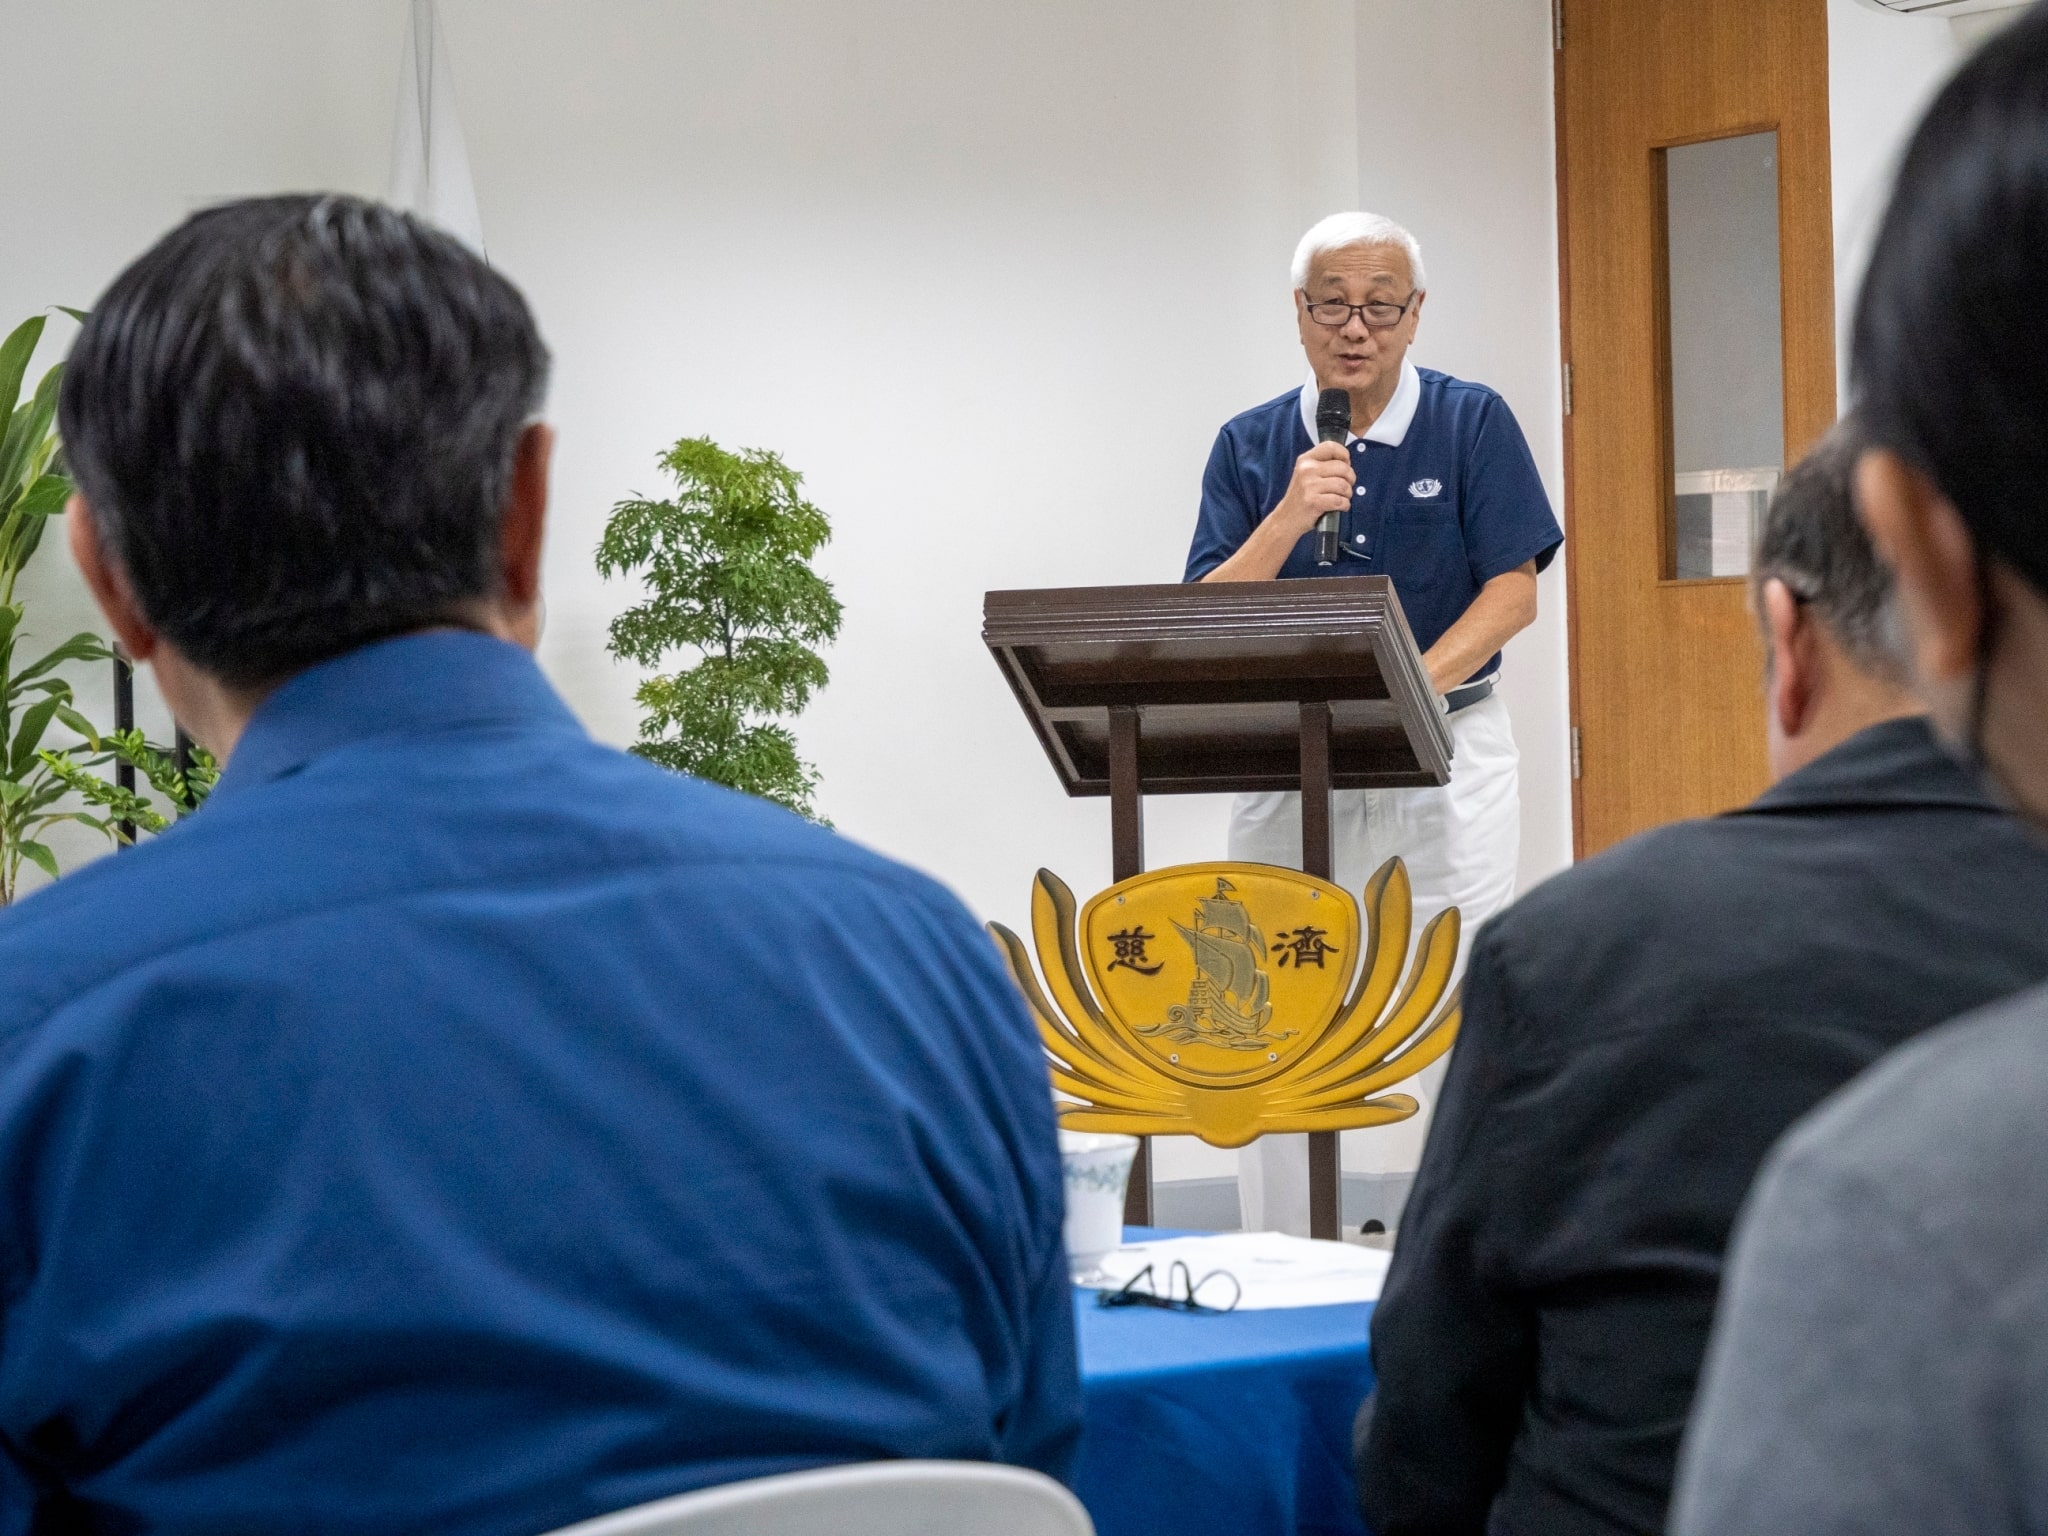 “We hope that through Tzu Chi’s scholarship program, we can uplift the lives of our students economically and help society at large,” said Tzu Chi Philippines CEO Henry Yuñez. 【Photo by Harold Alzaga】